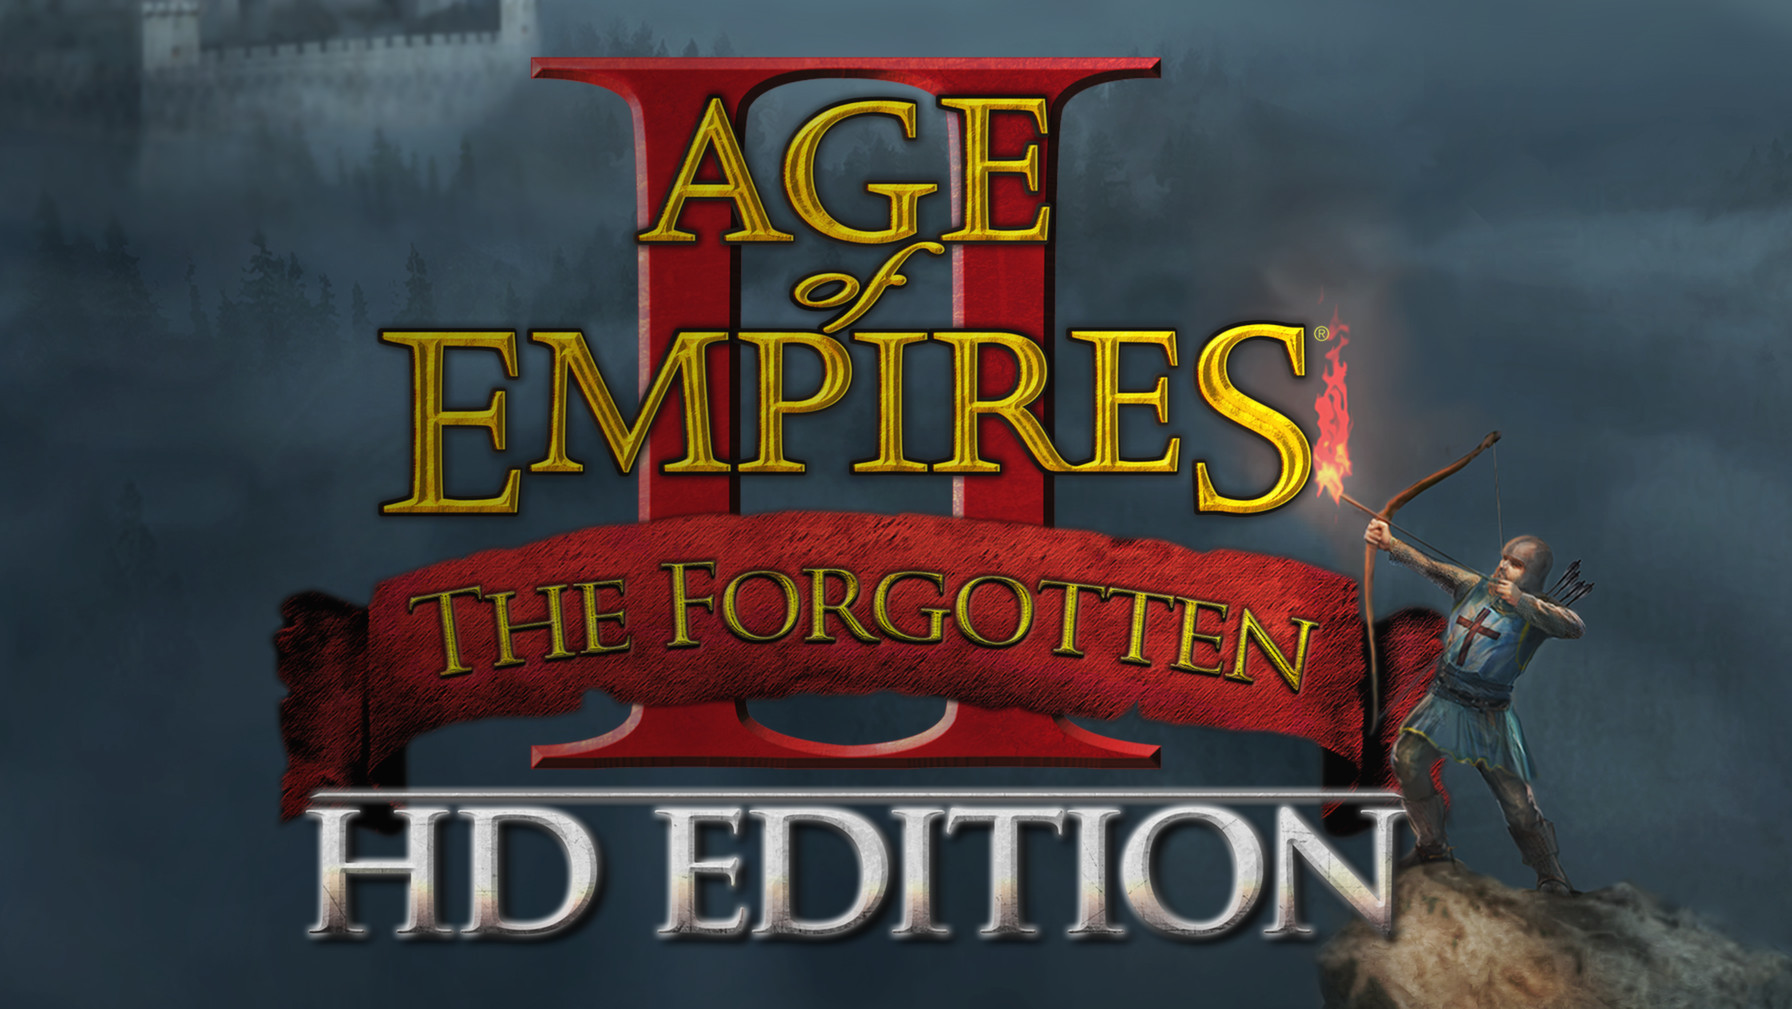 Age of Empires II: The Forgotten Picture